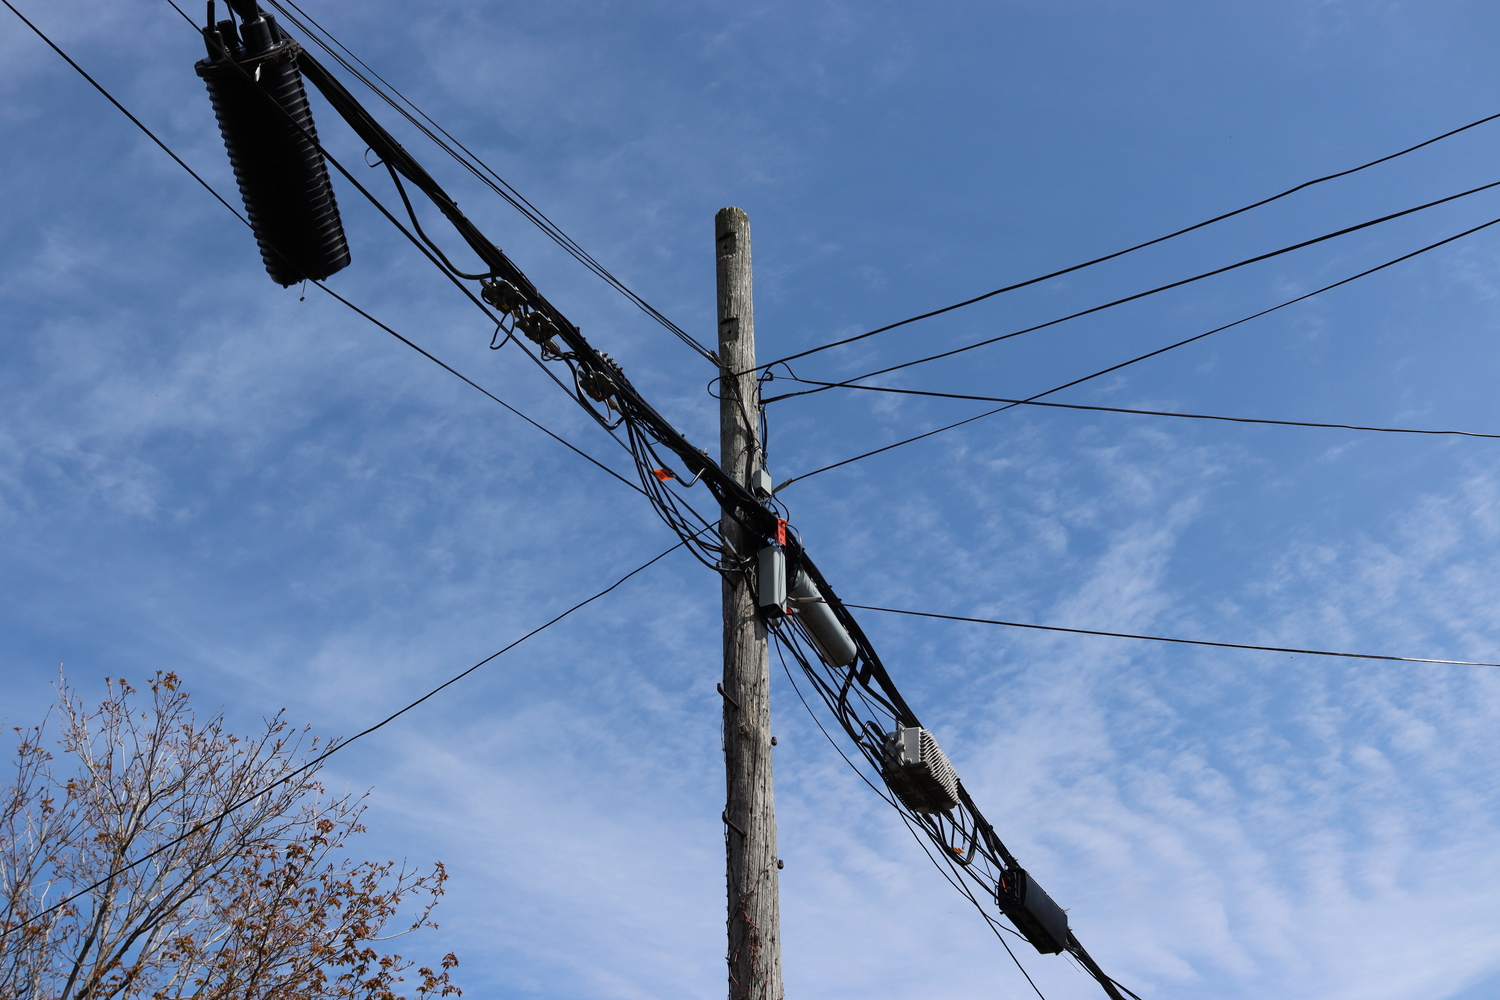 a telephone pole
against a blue sky with some light clouds,
cables coming off it in each diagonal.